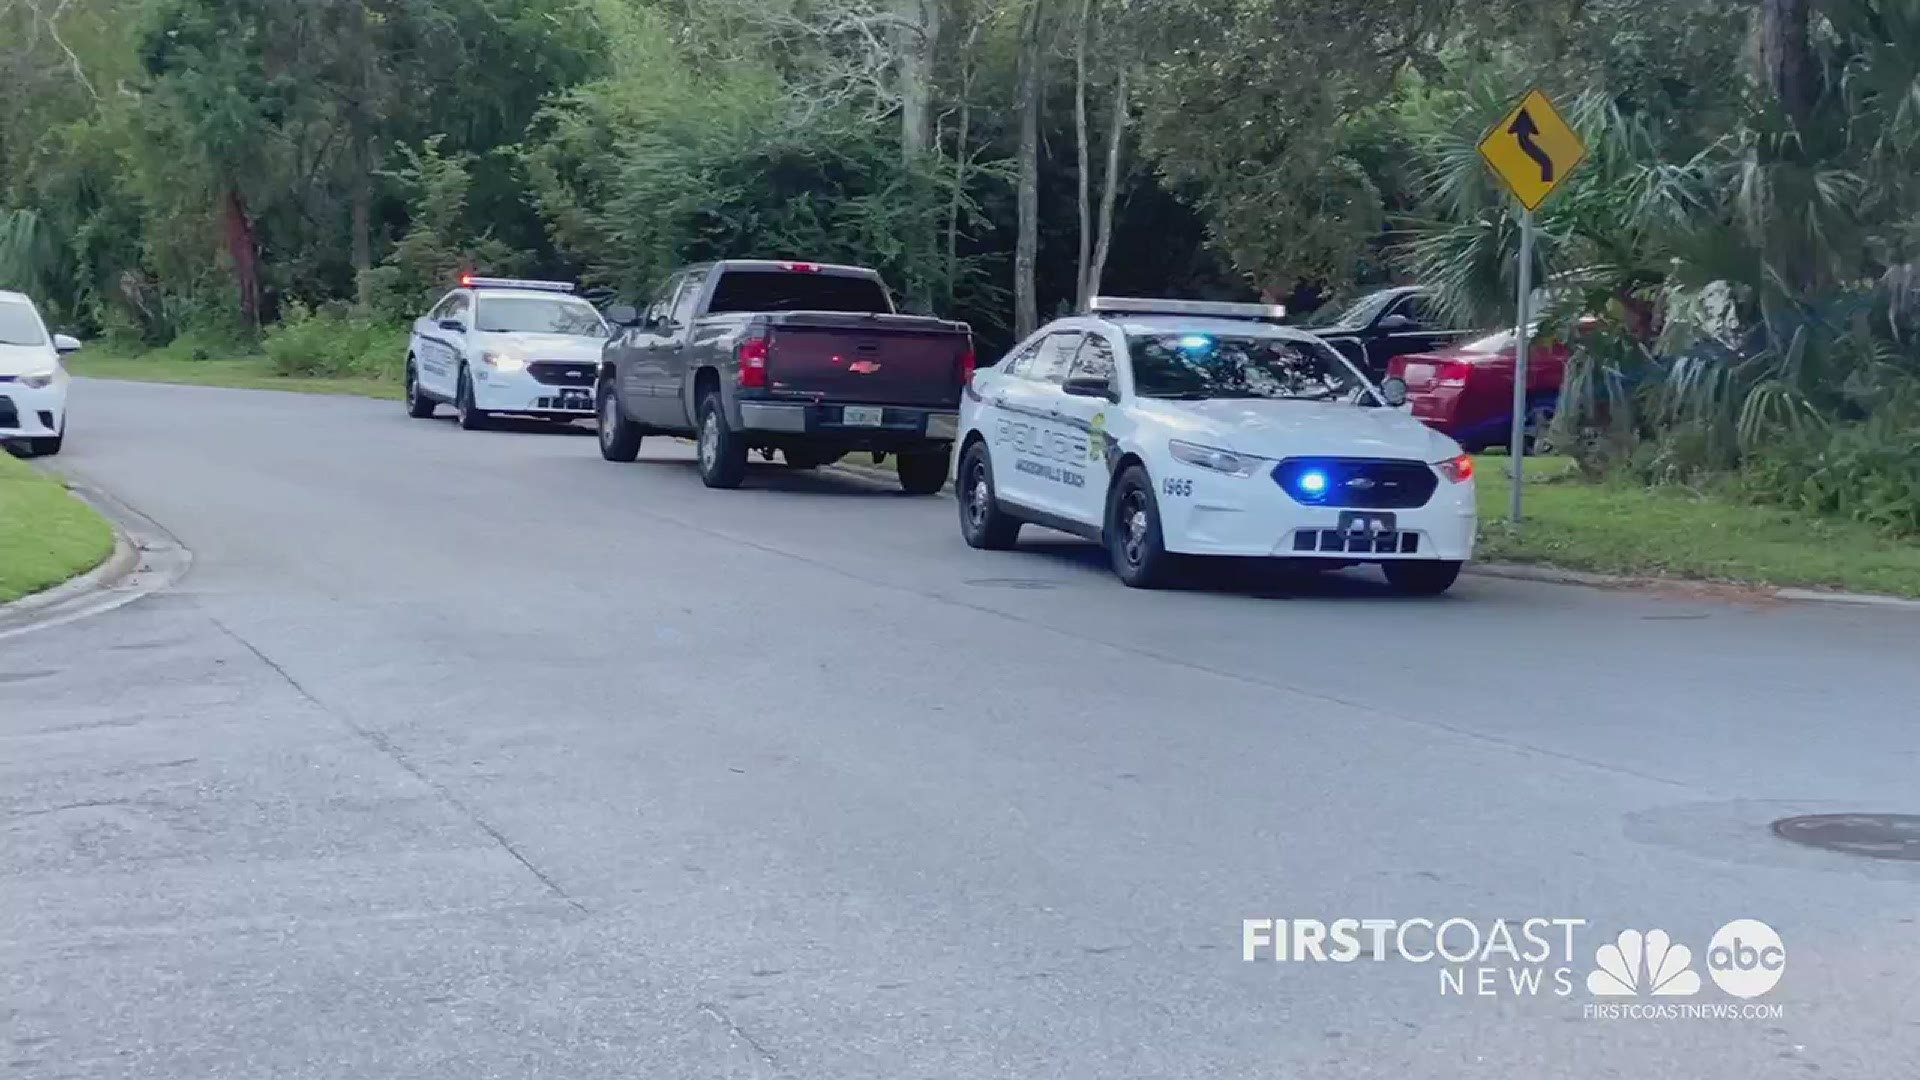 First Coast News is on the scene of a heavy police presence in the 1400 block of Republic Drive.